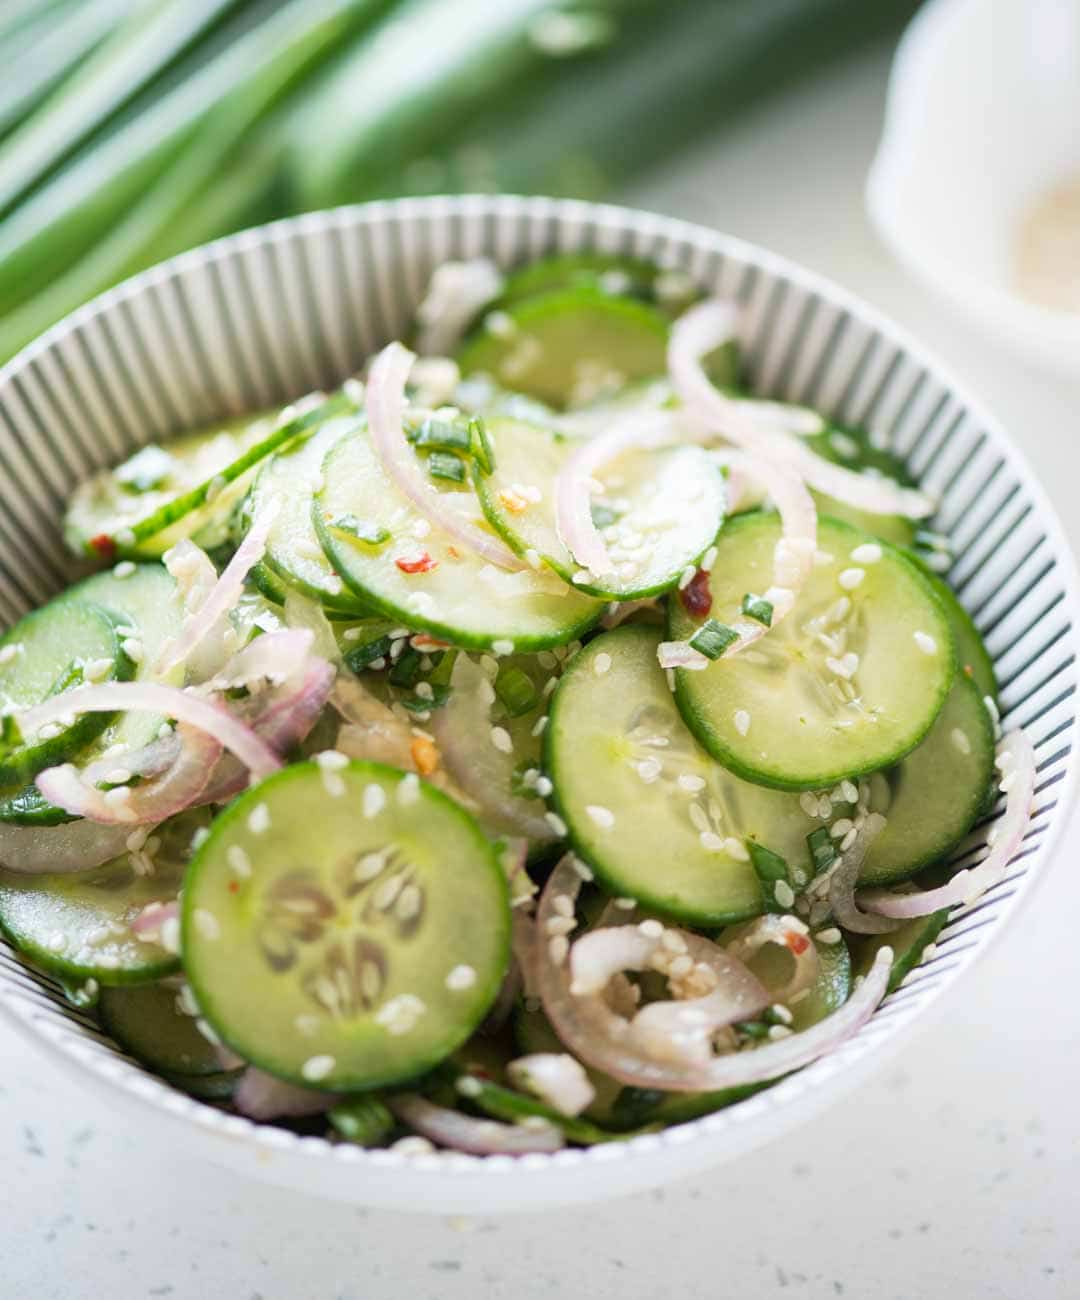 Asian Cucumber Salad with fresh crunchy Cucumber, Onion and an Asian dressing is a great side dish for any meal. It is very easy and quick to make.